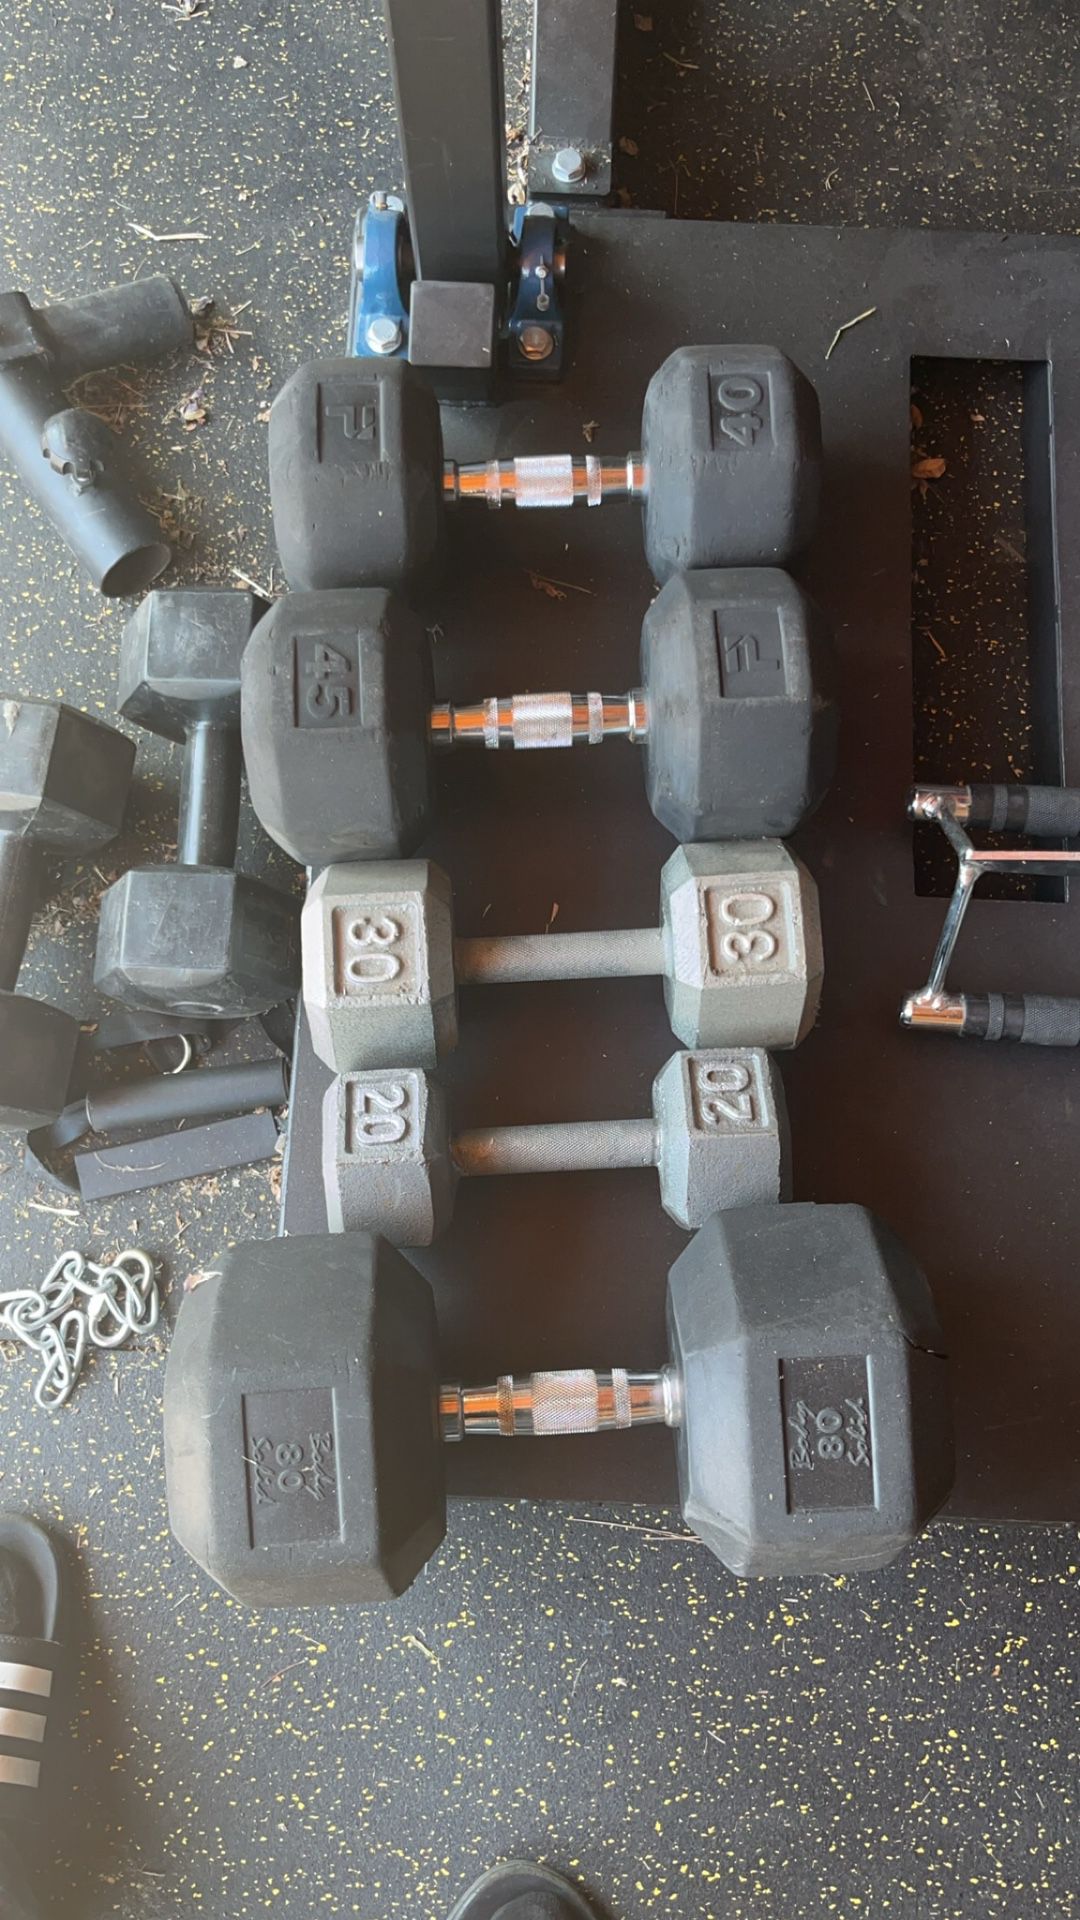 Single Dumbbell Weights 